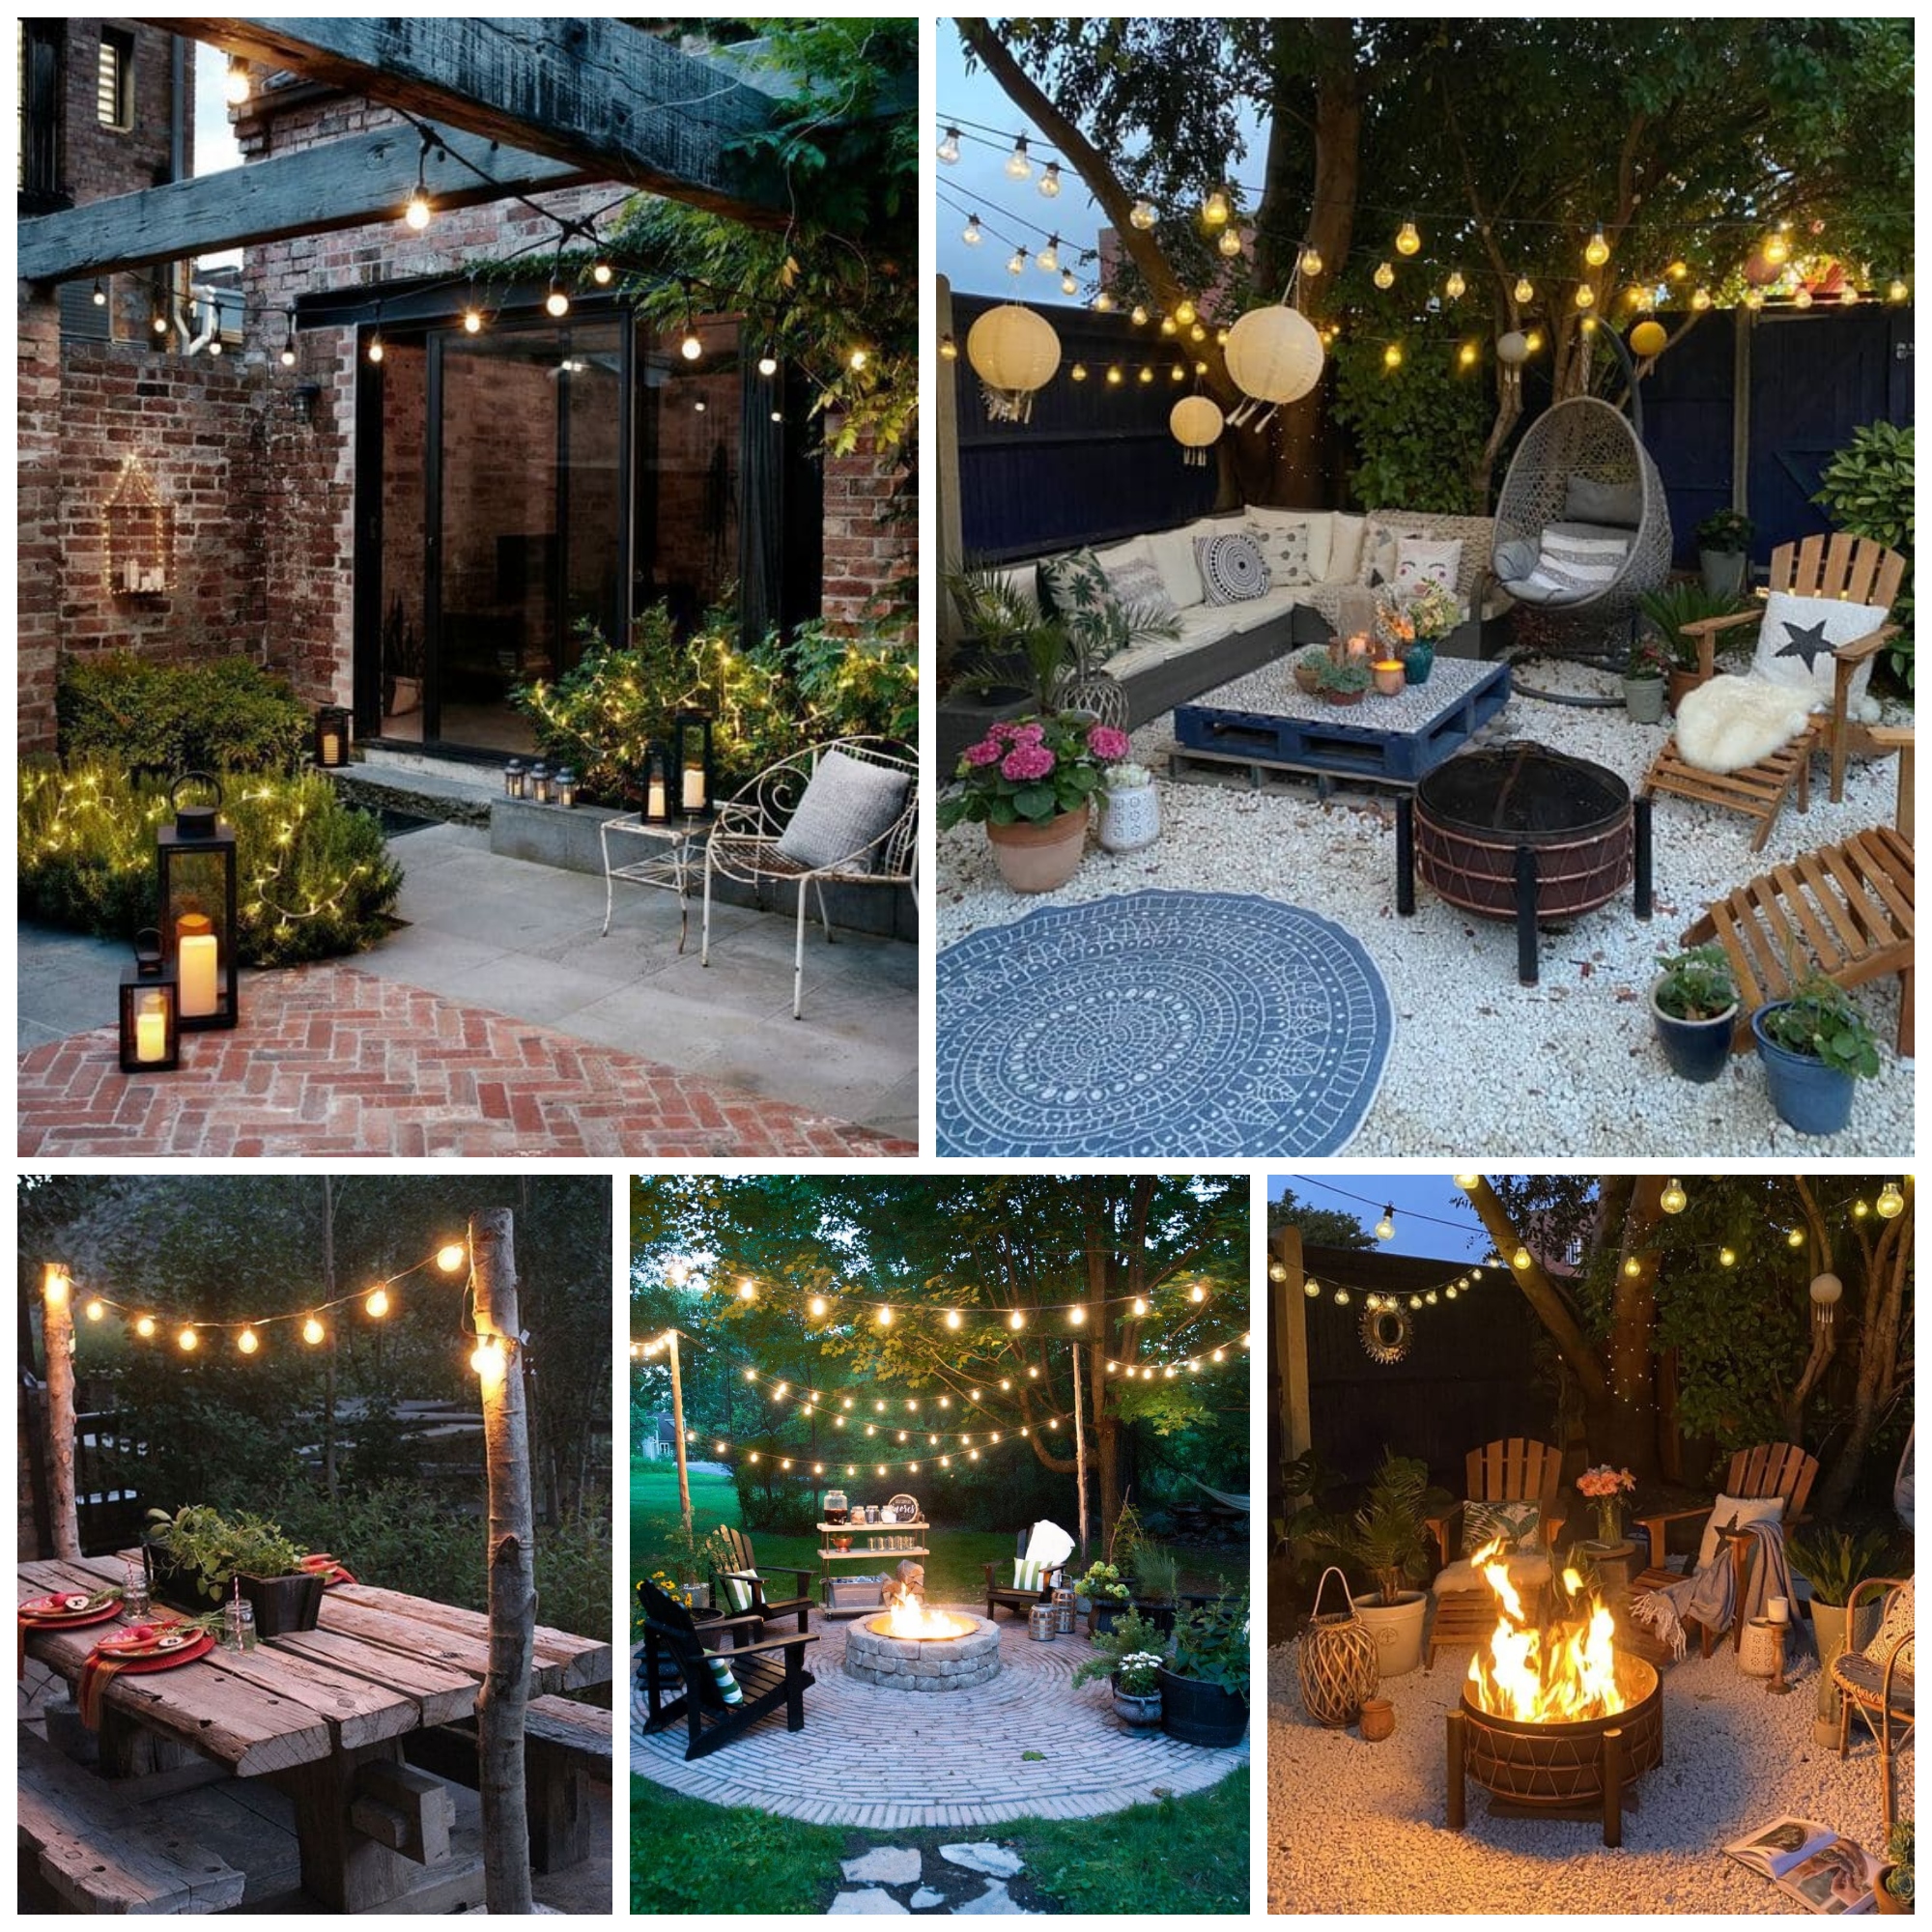 Best Ideas To Turn Gardens Into Inviting Spaces